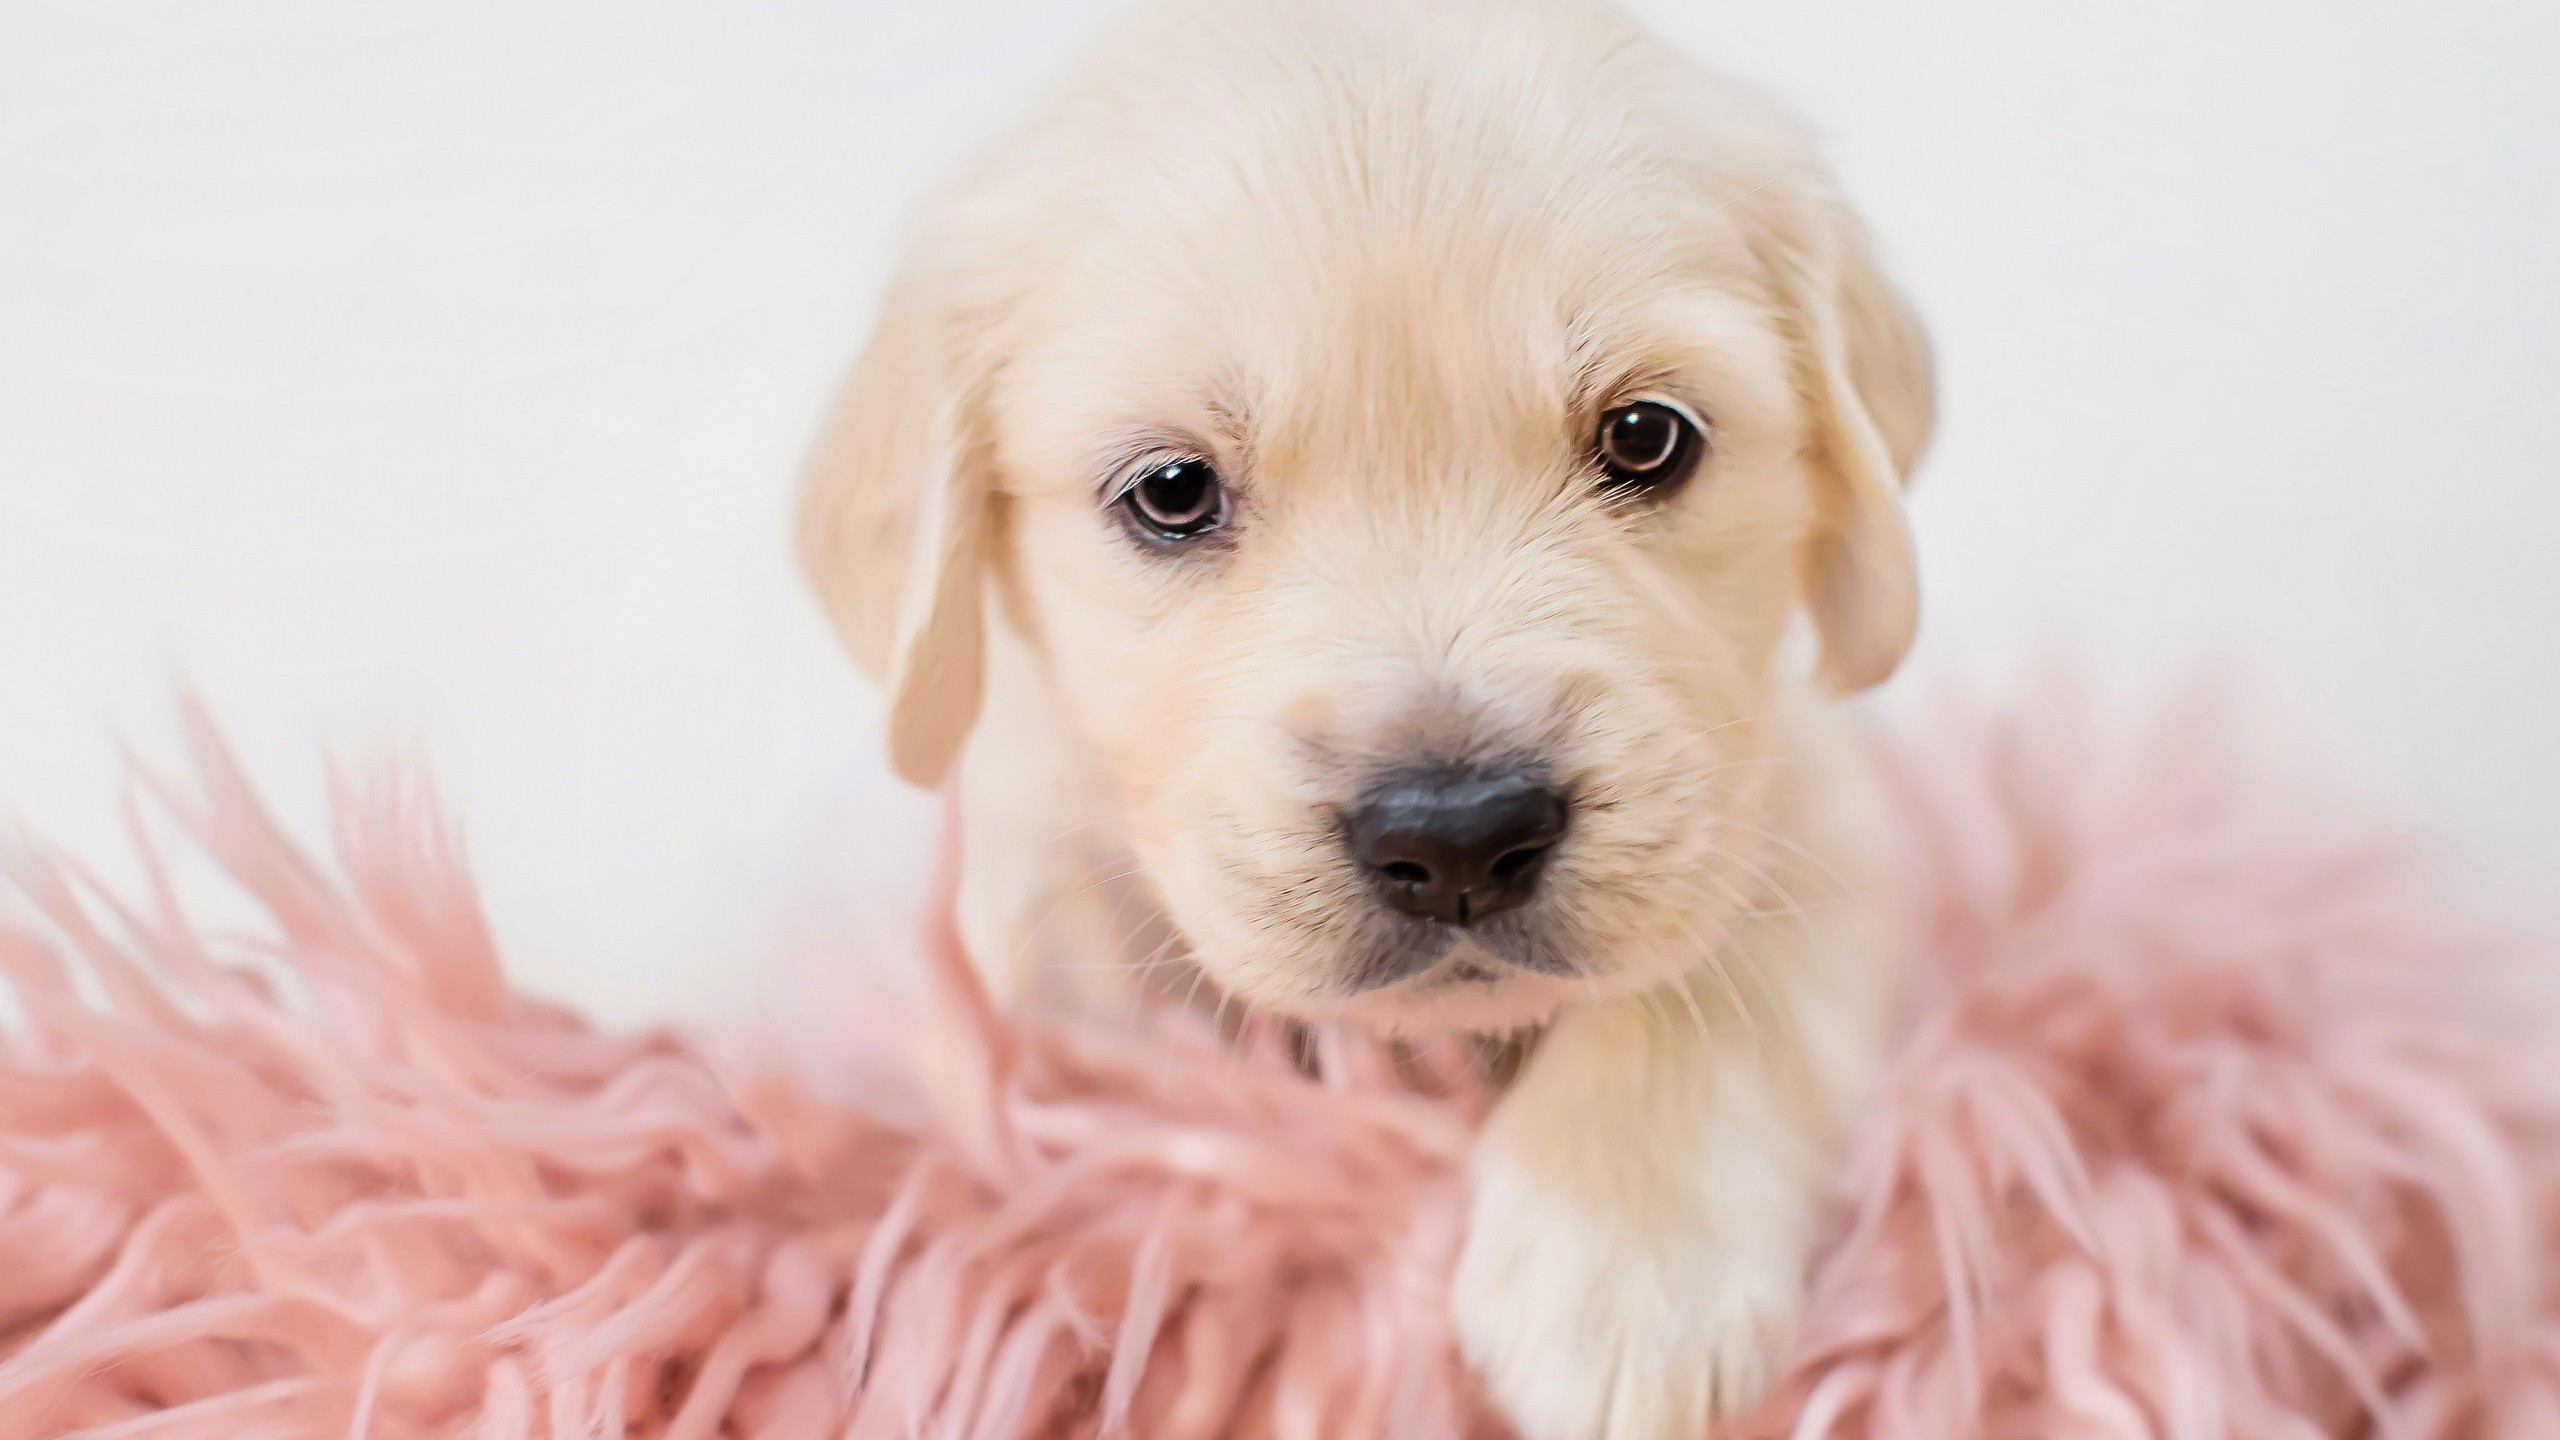 Download 2560x1440 Puppy, Cute, Dogs Wallpaper for iMac 27 inch